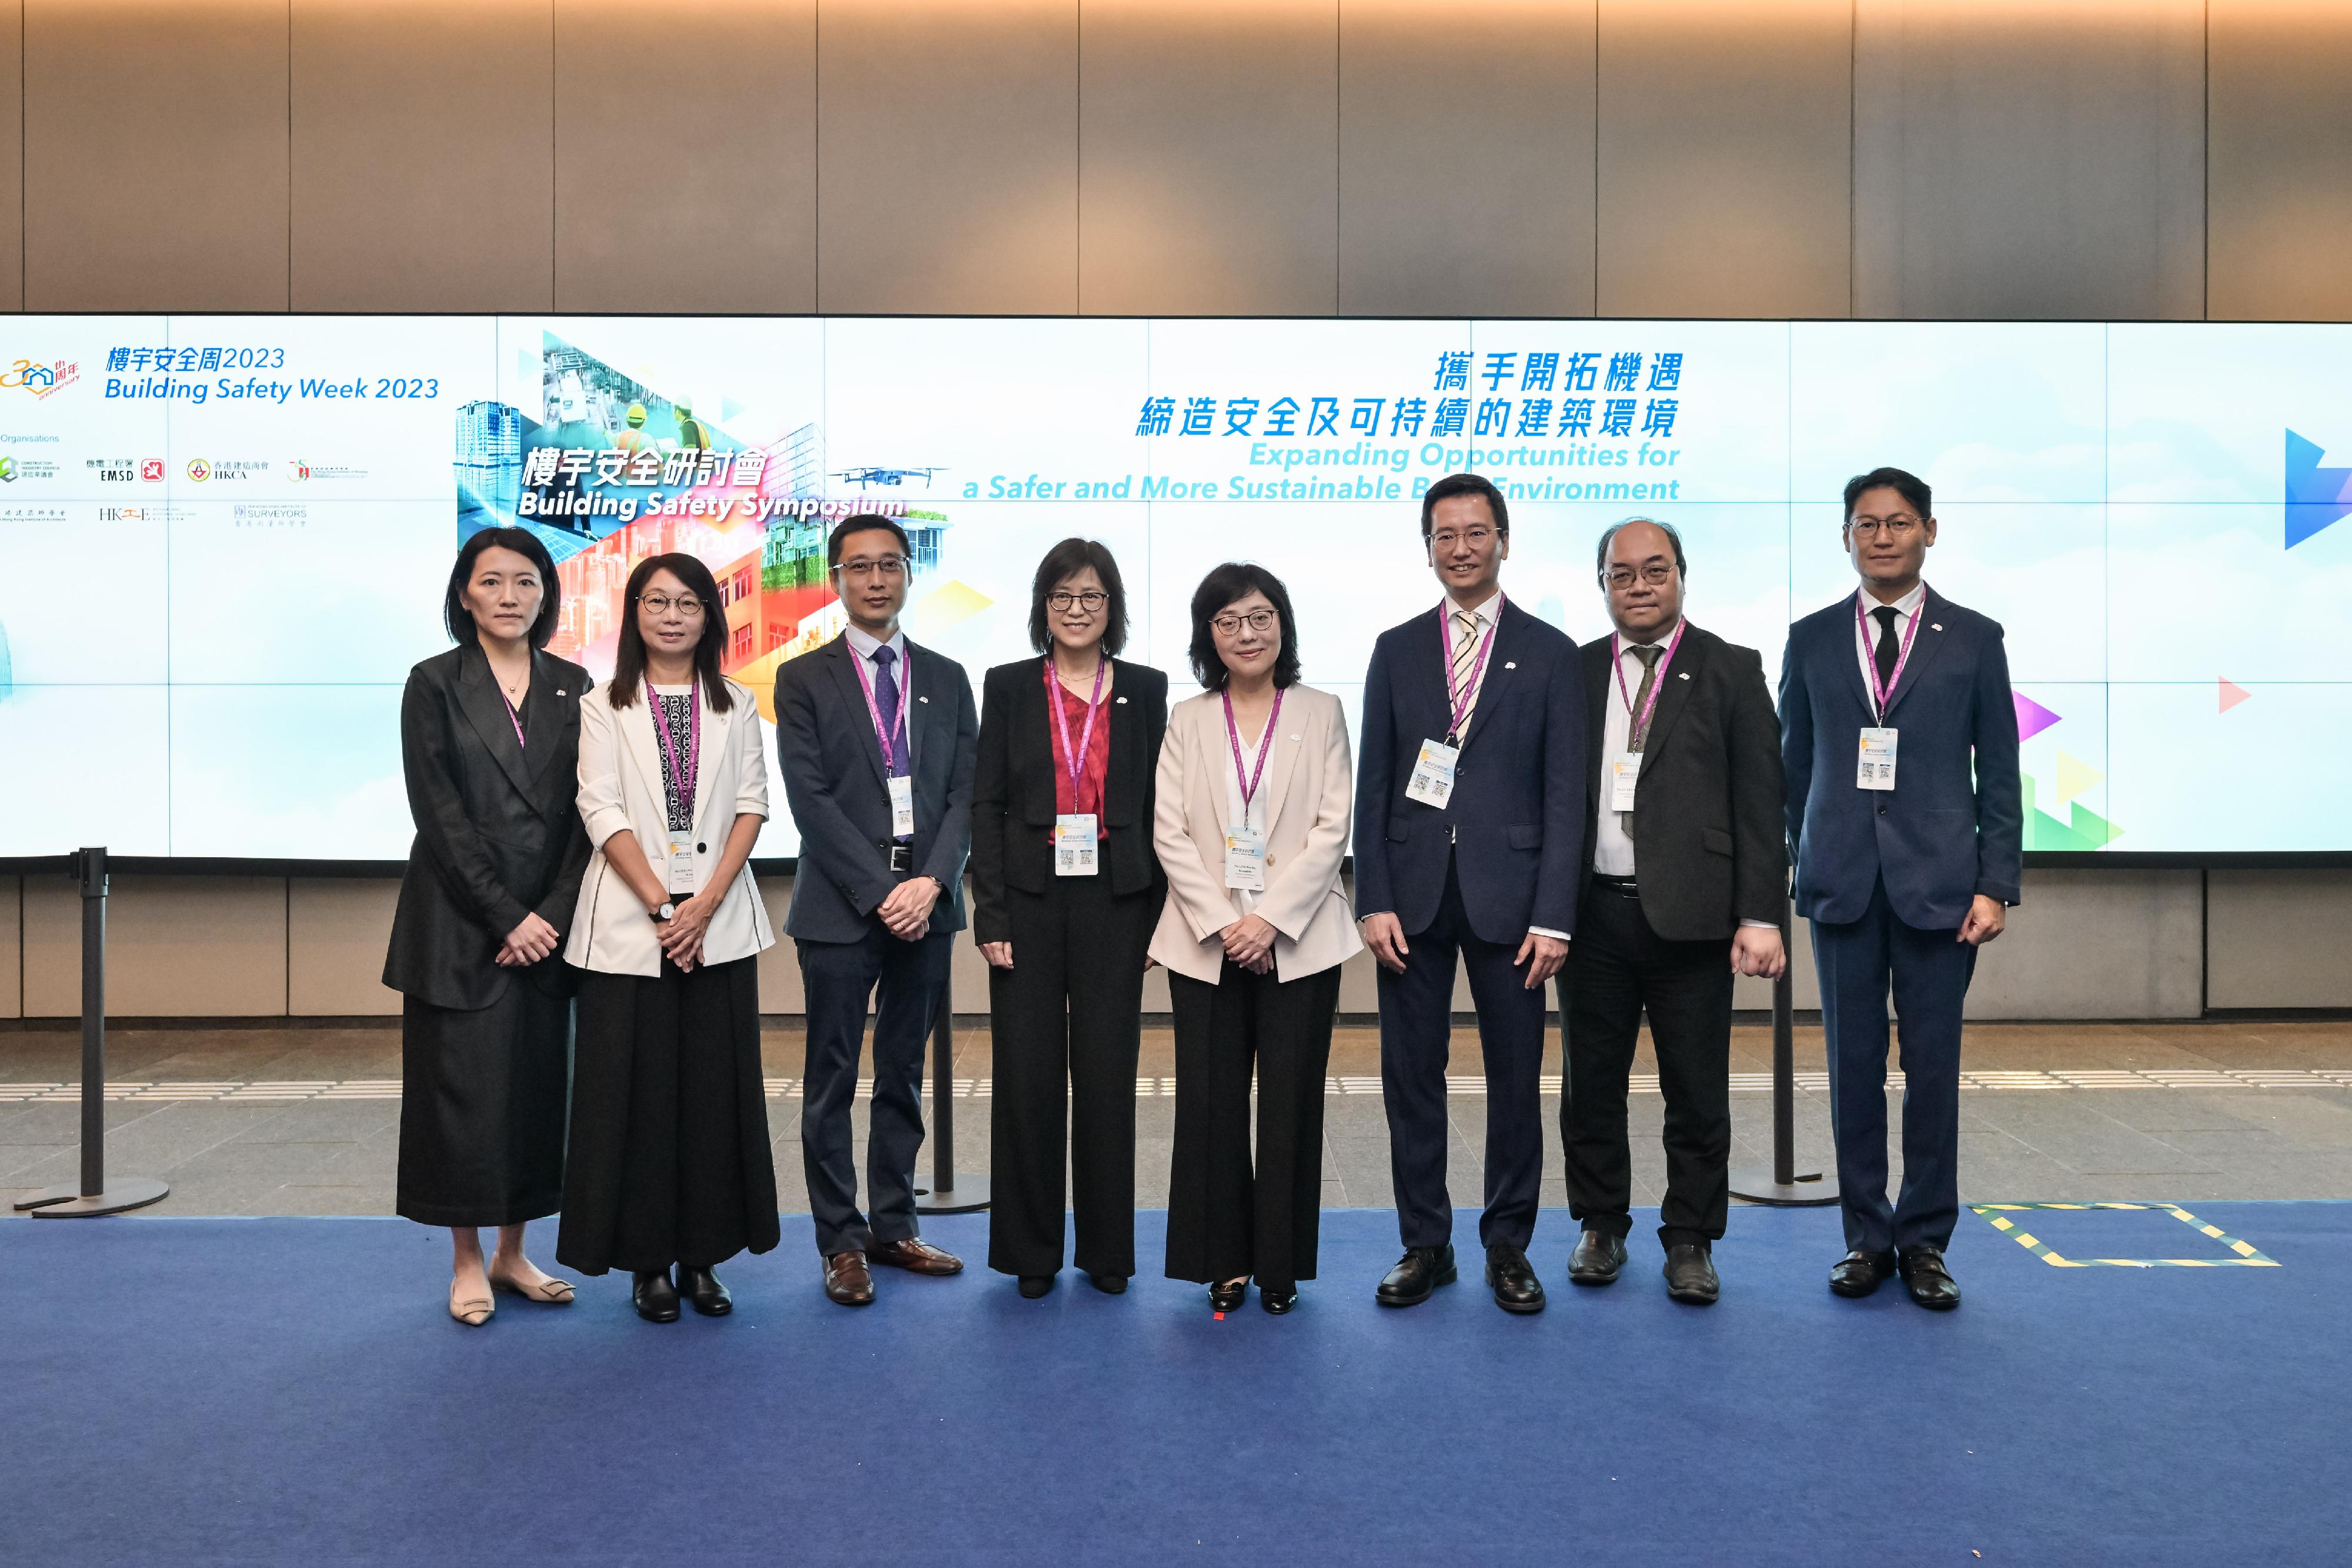 The Buildings Department held the closing event of Building Safety Week 2023, the Building Safety Symposium, at the Hong Kong Palace Museum today (October 27). The Secretary for Development, Ms Bernadette Linn (fourth right); the Director of Buildings, Ms Clarice Yu (fourth left); the Deputy Director of Buildings, Mr Ho Chun-hung (third right); and other Assistant Directors of Buildings are pictured at the venue of the symposium.